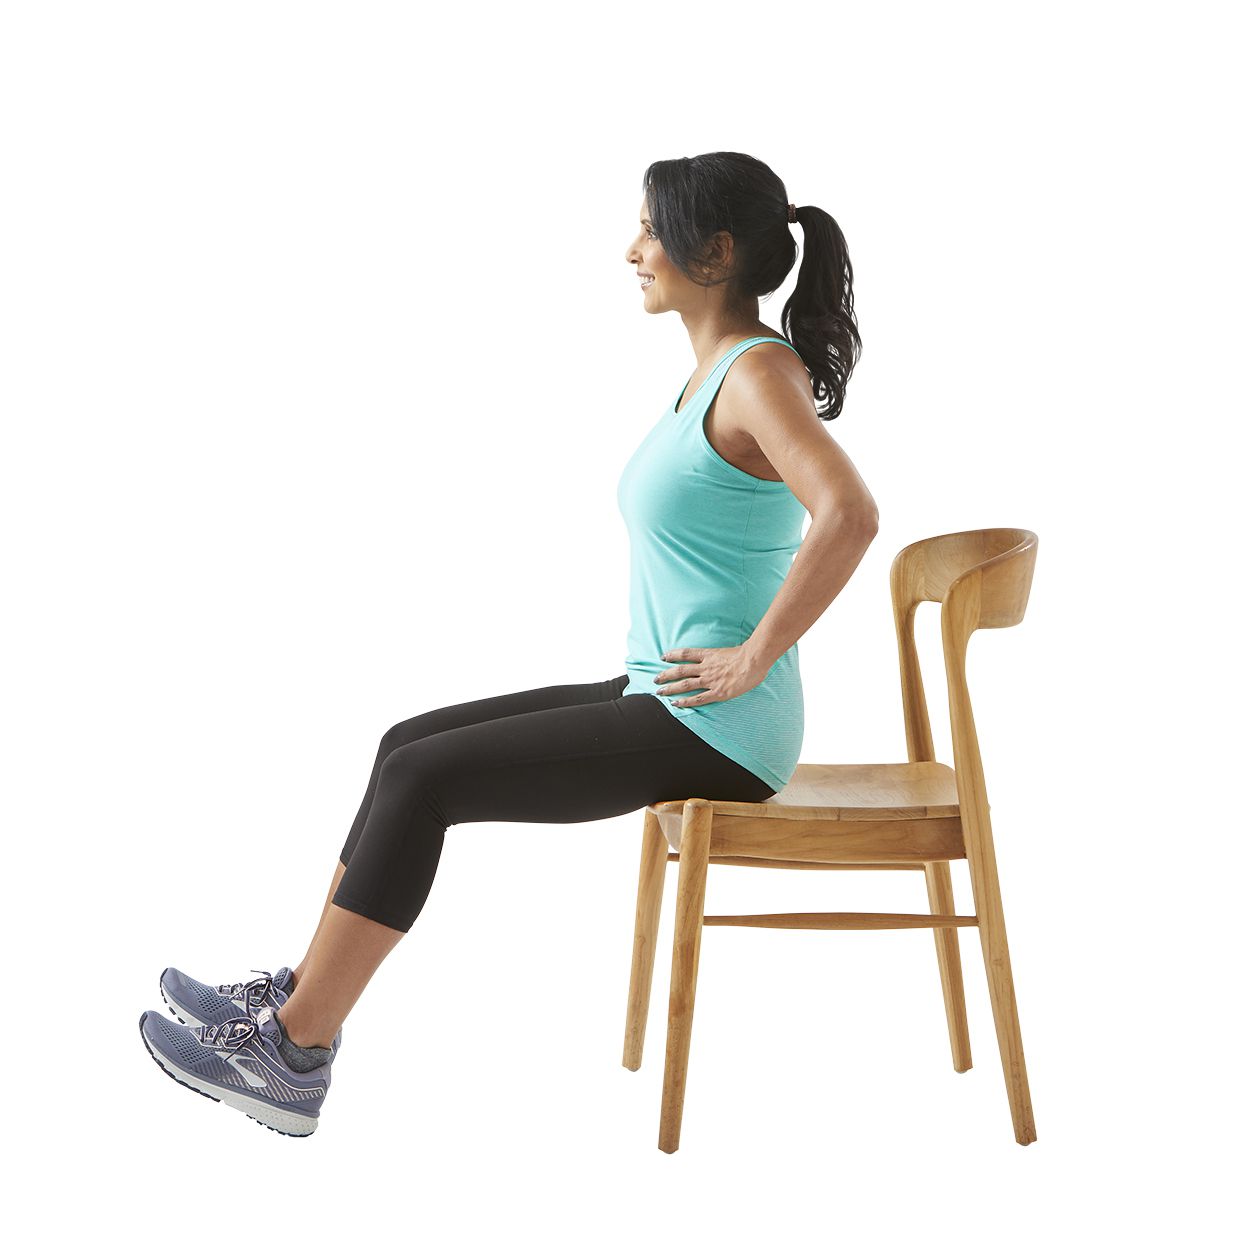 woman stretching in chair